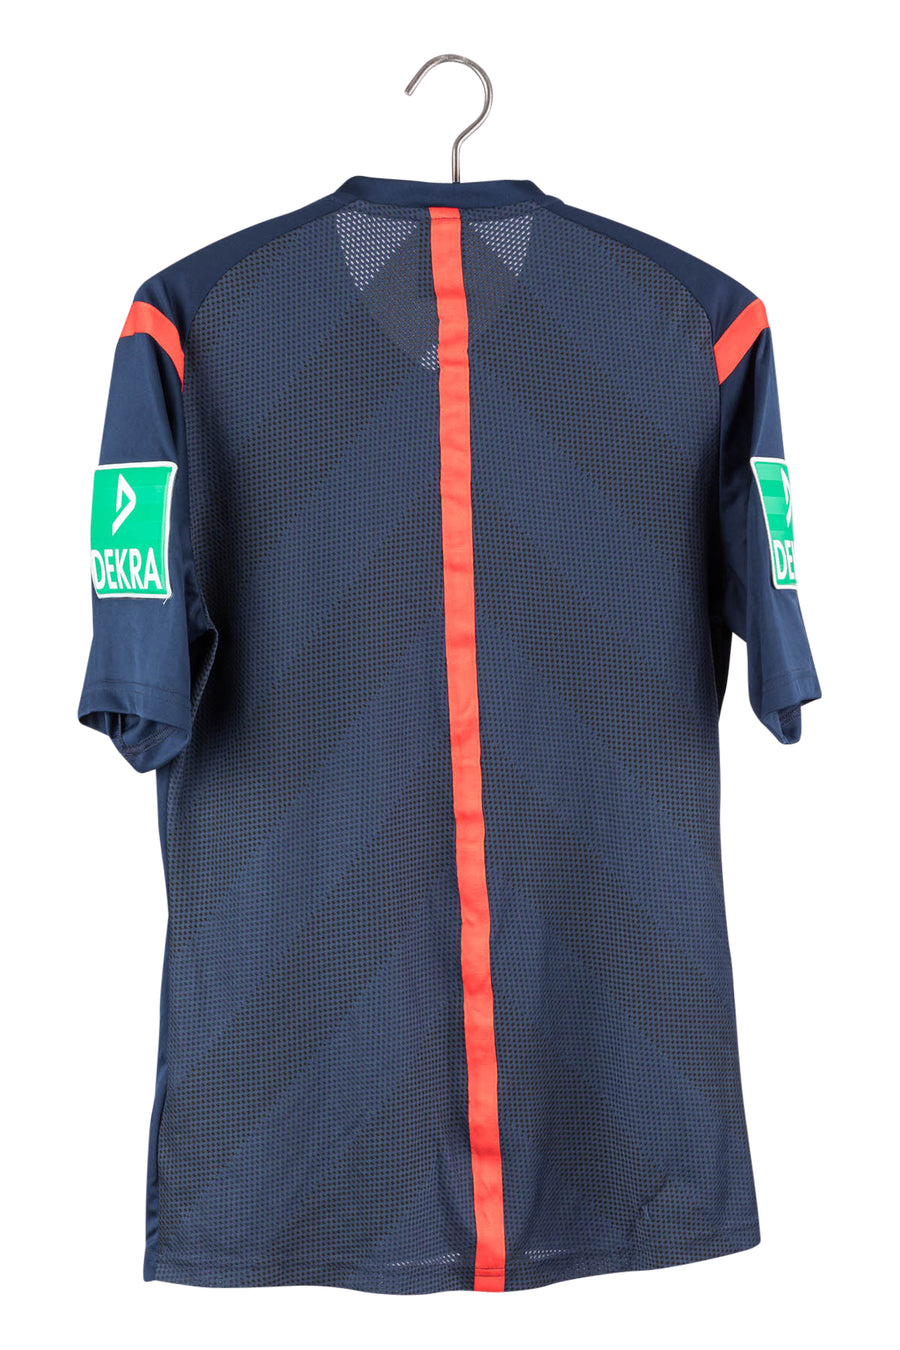 DFB Official 2014 Referee Shirt